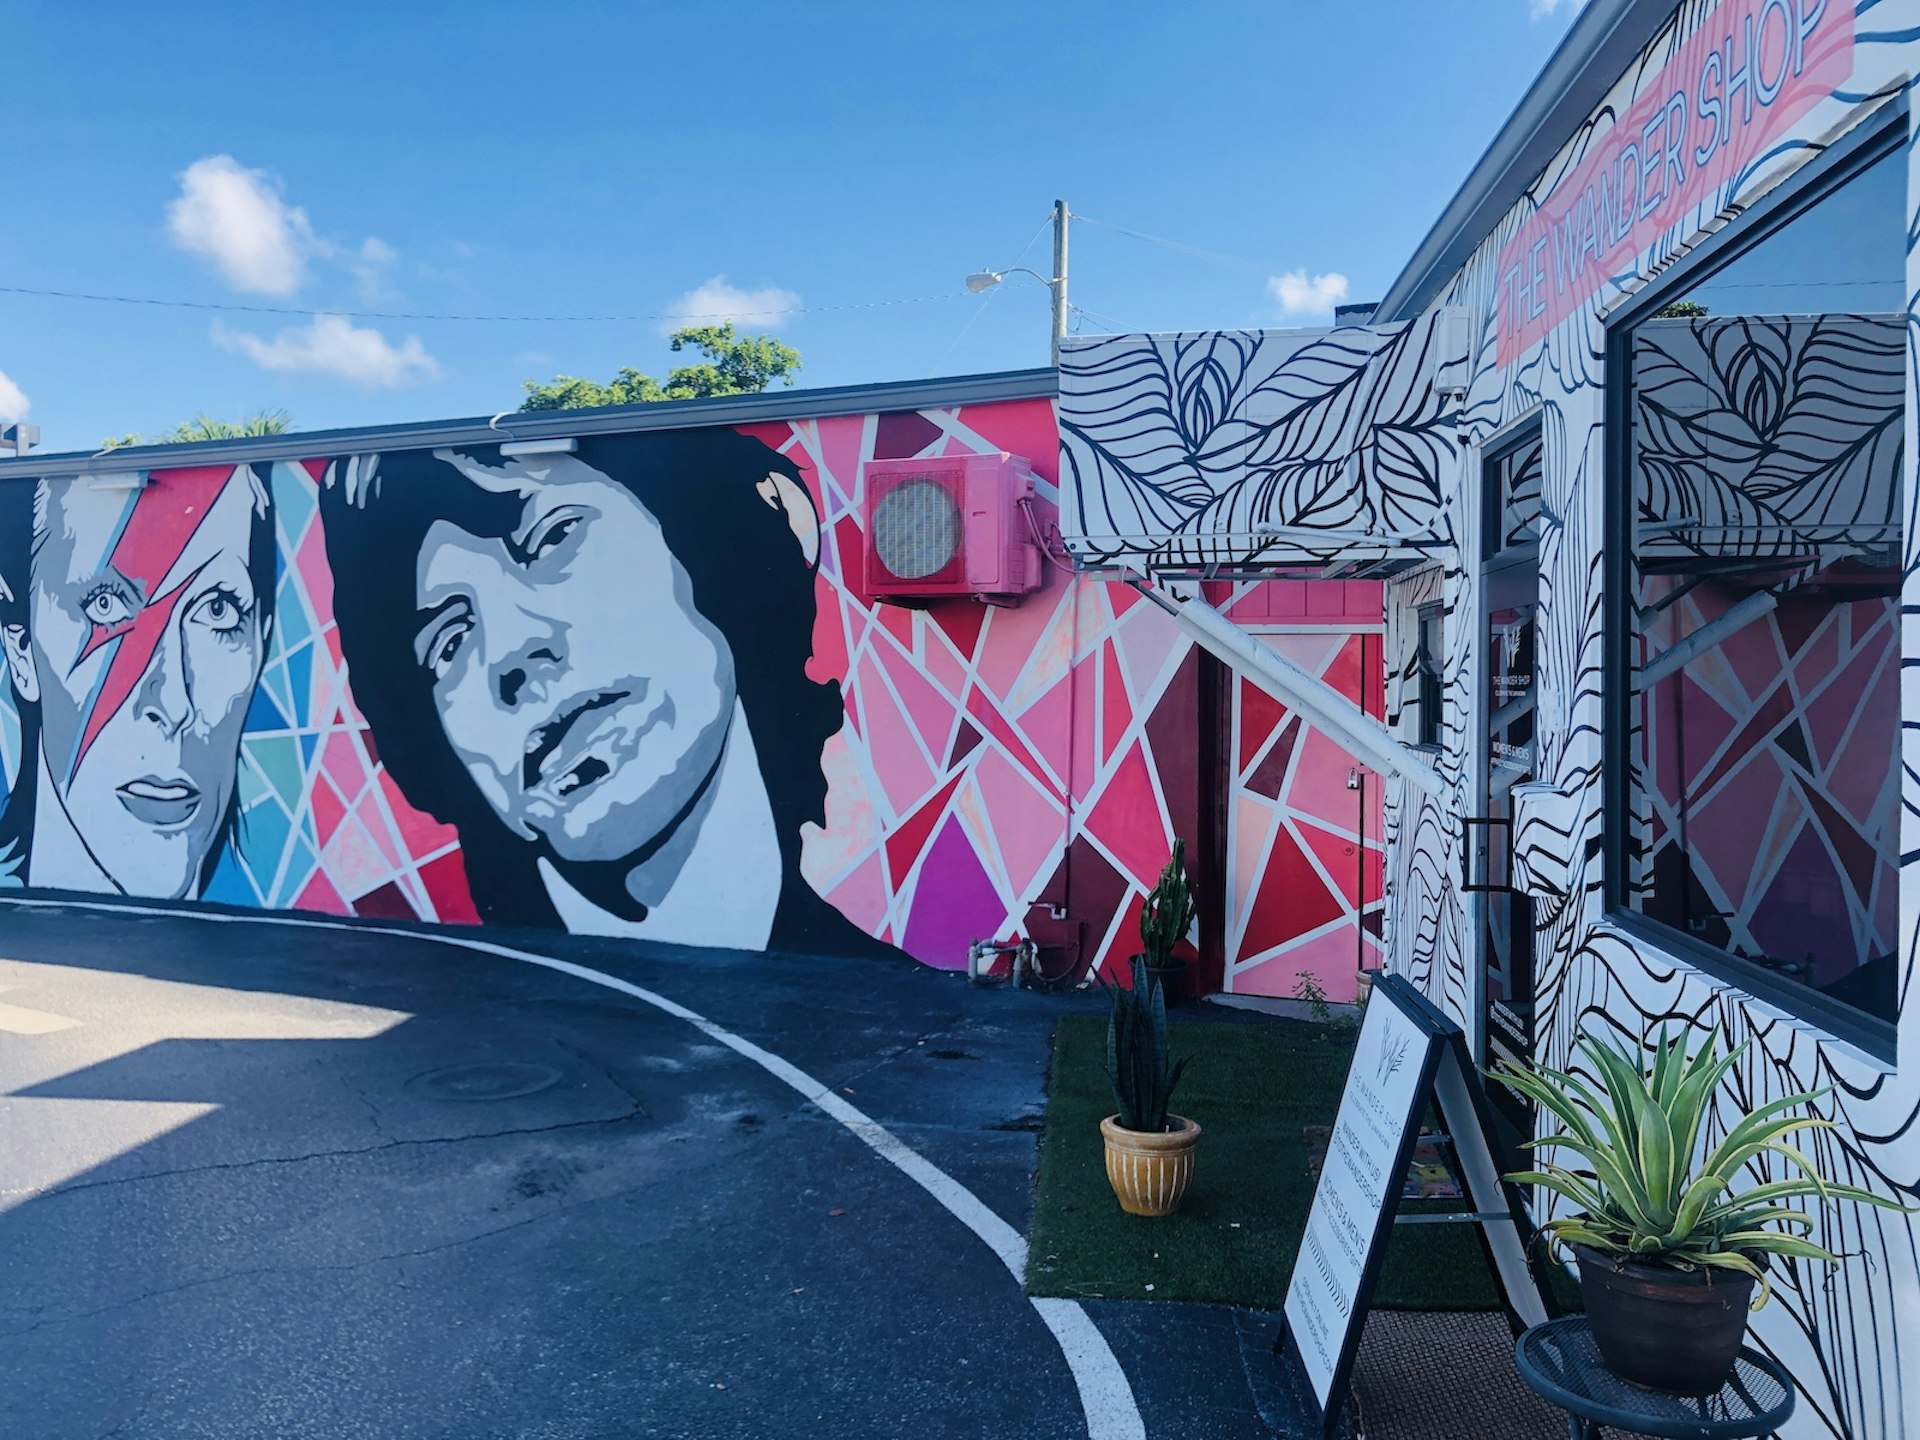 A mural of David Bowie and Mick Jagger in pink, grey and purple shades covers a wall next to a small boutique.